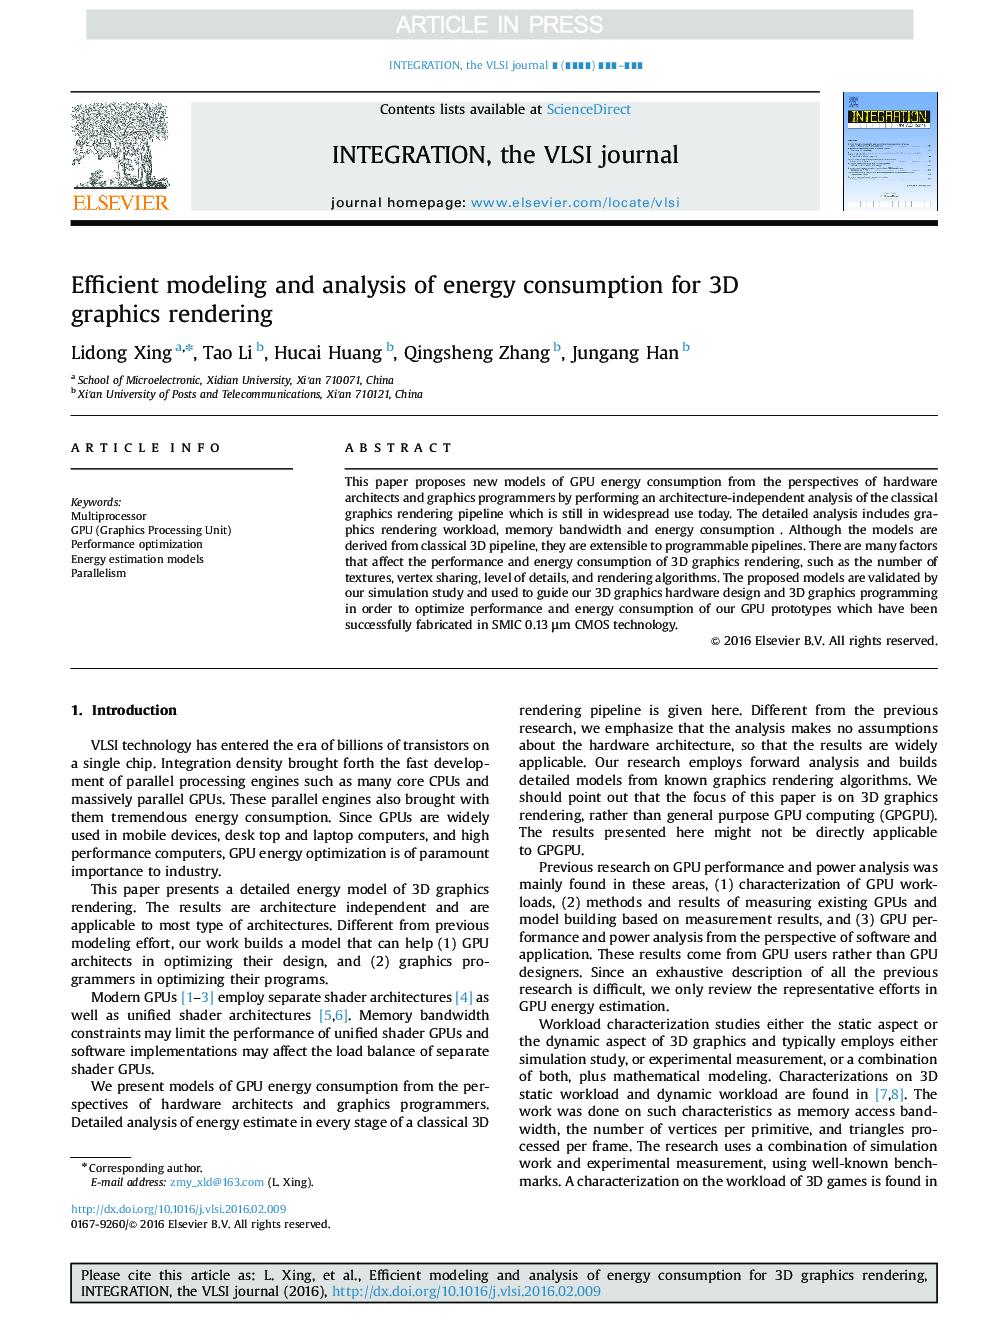 Efficient modeling and analysis of energy consumption for 3D graphics rendering